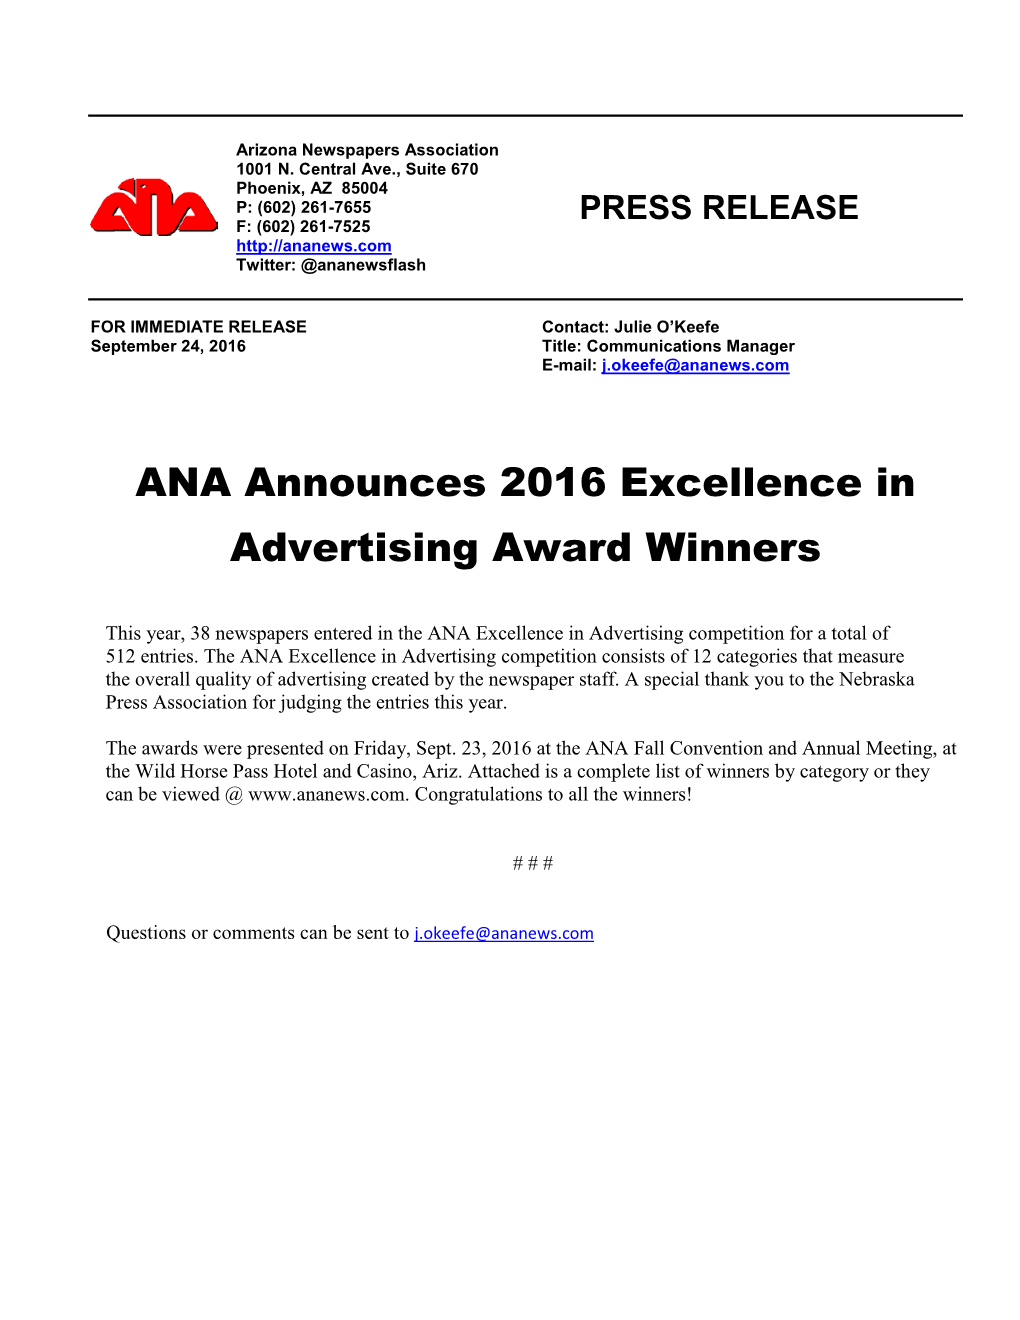 ANA Announces 2016 Excellence in Advertising Award Winners